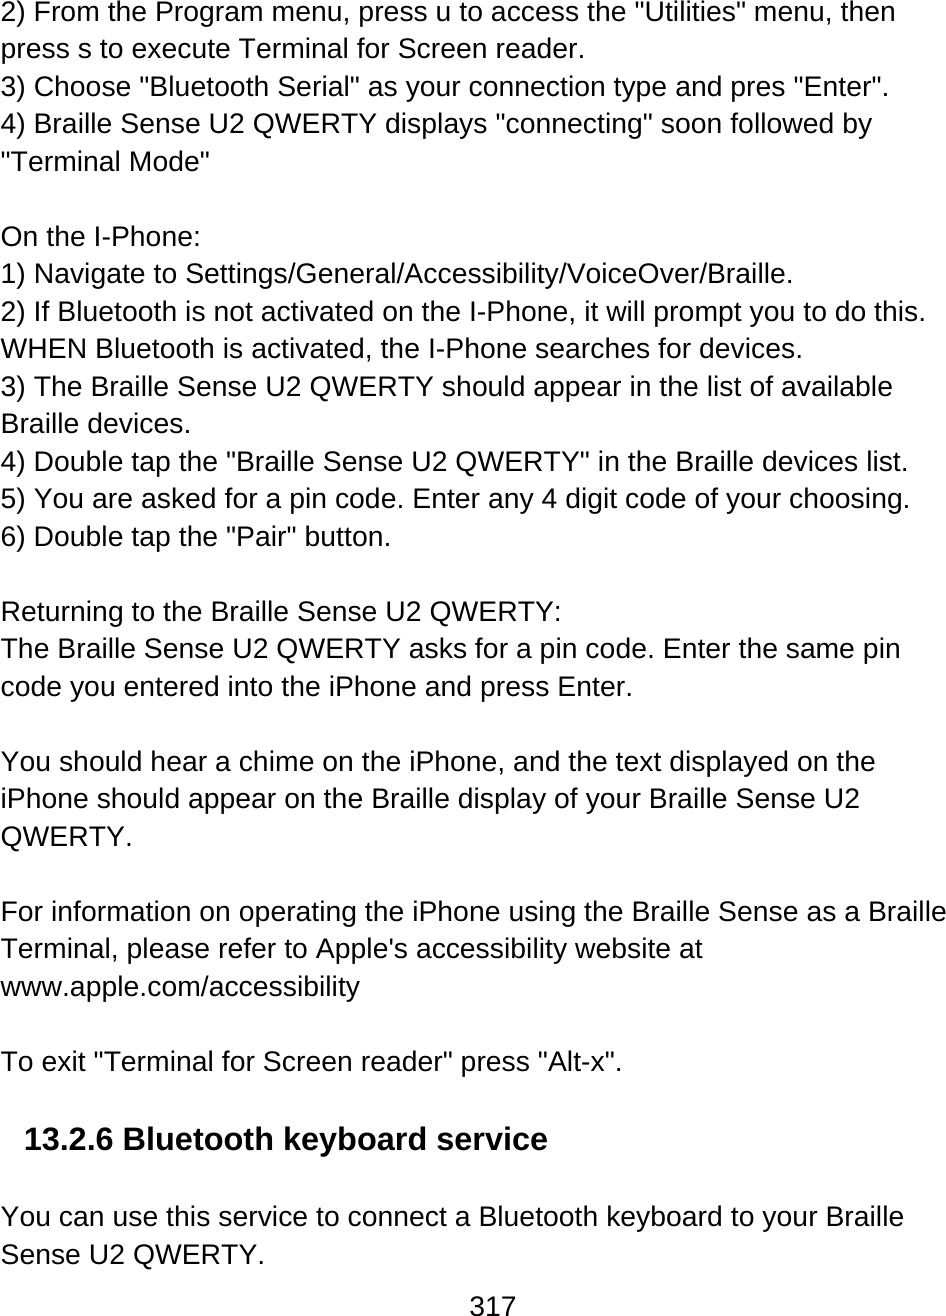 317  2) From the Program menu, press u to access the &quot;Utilities&quot; menu, then press s to execute Terminal for Screen reader.  3) Choose &quot;Bluetooth Serial&quot; as your connection type and pres &quot;Enter&quot;. 4) Braille Sense U2 QWERTY displays &quot;connecting&quot; soon followed by &quot;Terminal Mode&quot;  On the I-Phone: 1) Navigate to Settings/General/Accessibility/VoiceOver/Braille. 2) If Bluetooth is not activated on the I-Phone, it will prompt you to do this. WHEN Bluetooth is activated, the I-Phone searches for devices. 3) The Braille Sense U2 QWERTY should appear in the list of available Braille devices. 4) Double tap the &quot;Braille Sense U2 QWERTY&quot; in the Braille devices list. 5) You are asked for a pin code. Enter any 4 digit code of your choosing. 6) Double tap the &quot;Pair&quot; button.    Returning to the Braille Sense U2 QWERTY: The Braille Sense U2 QWERTY asks for a pin code. Enter the same pin code you entered into the iPhone and press Enter.  You should hear a chime on the iPhone, and the text displayed on the iPhone should appear on the Braille display of your Braille Sense U2 QWERTY.  For information on operating the iPhone using the Braille Sense as a Braille Terminal, please refer to Apple&apos;s accessibility website at www.apple.com/accessibility   To exit &quot;Terminal for Screen reader&quot; press &quot;Alt-x&quot;.  13.2.6 Bluetooth keyboard service  You can use this service to connect a Bluetooth keyboard to your Braille Sense U2 QWERTY.  